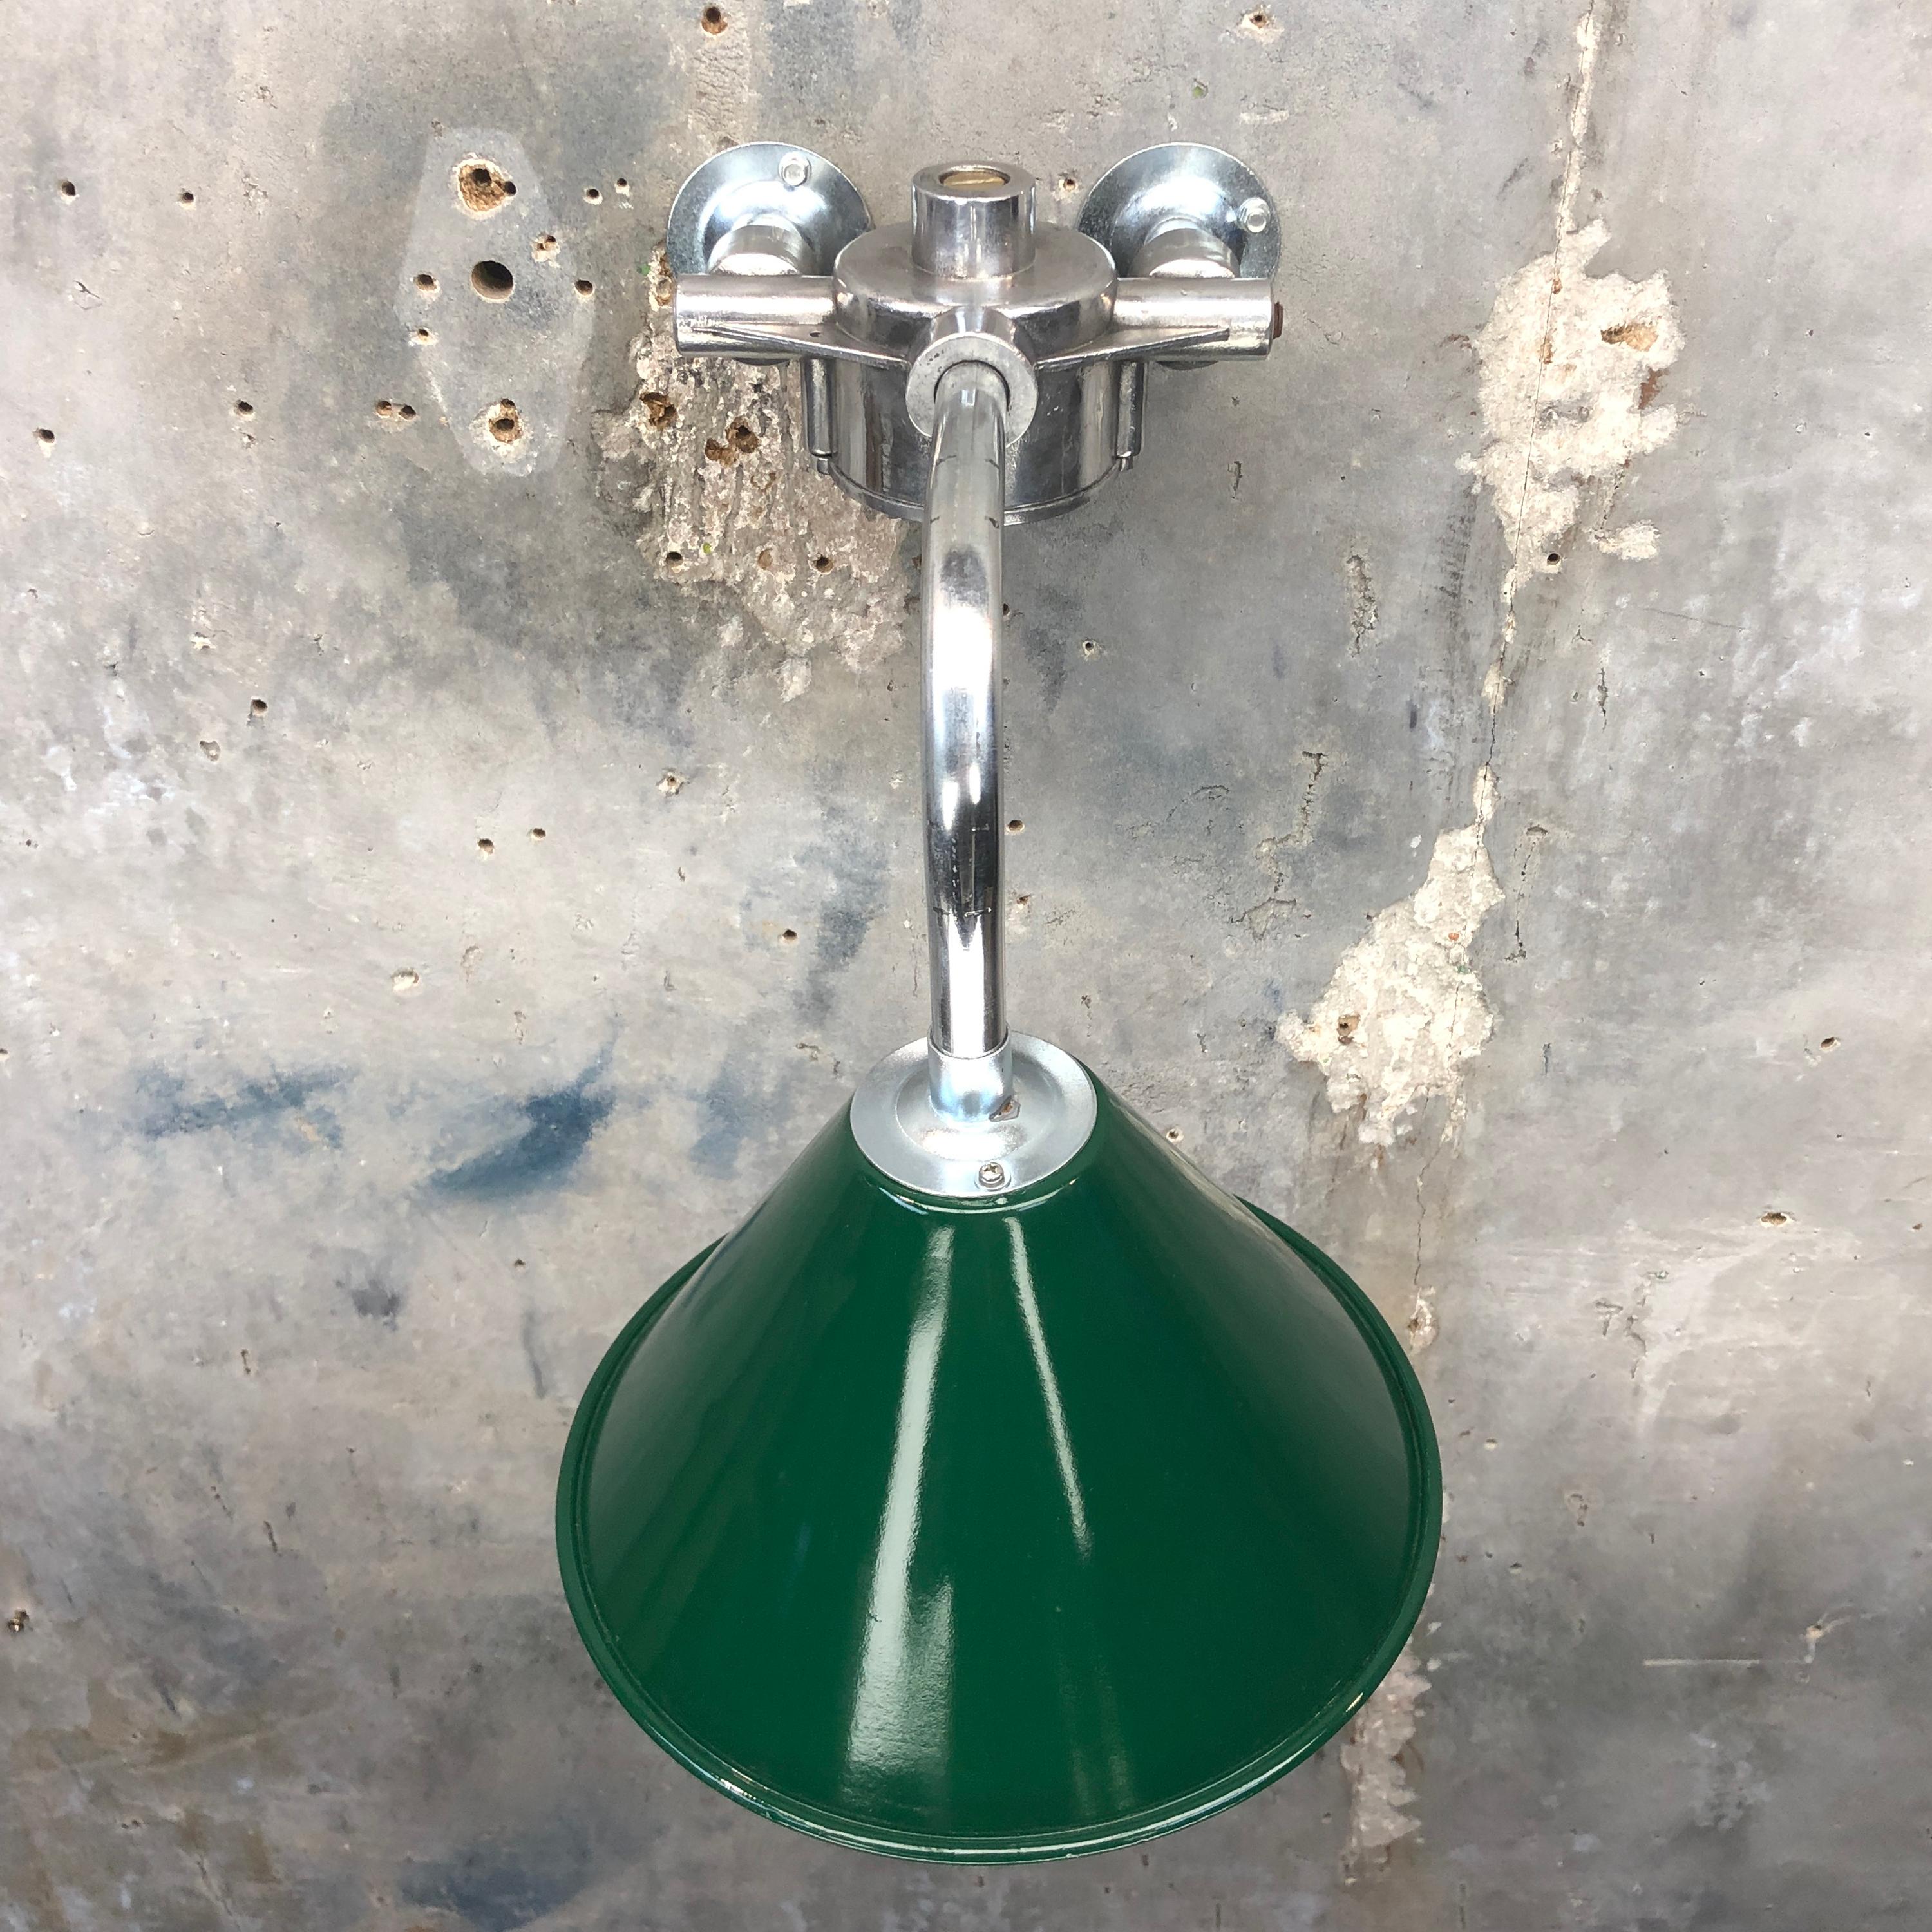 1980s Ex British Army Lamp Shade and Galvanized Steel Short Reach Cantilever For Sale 8